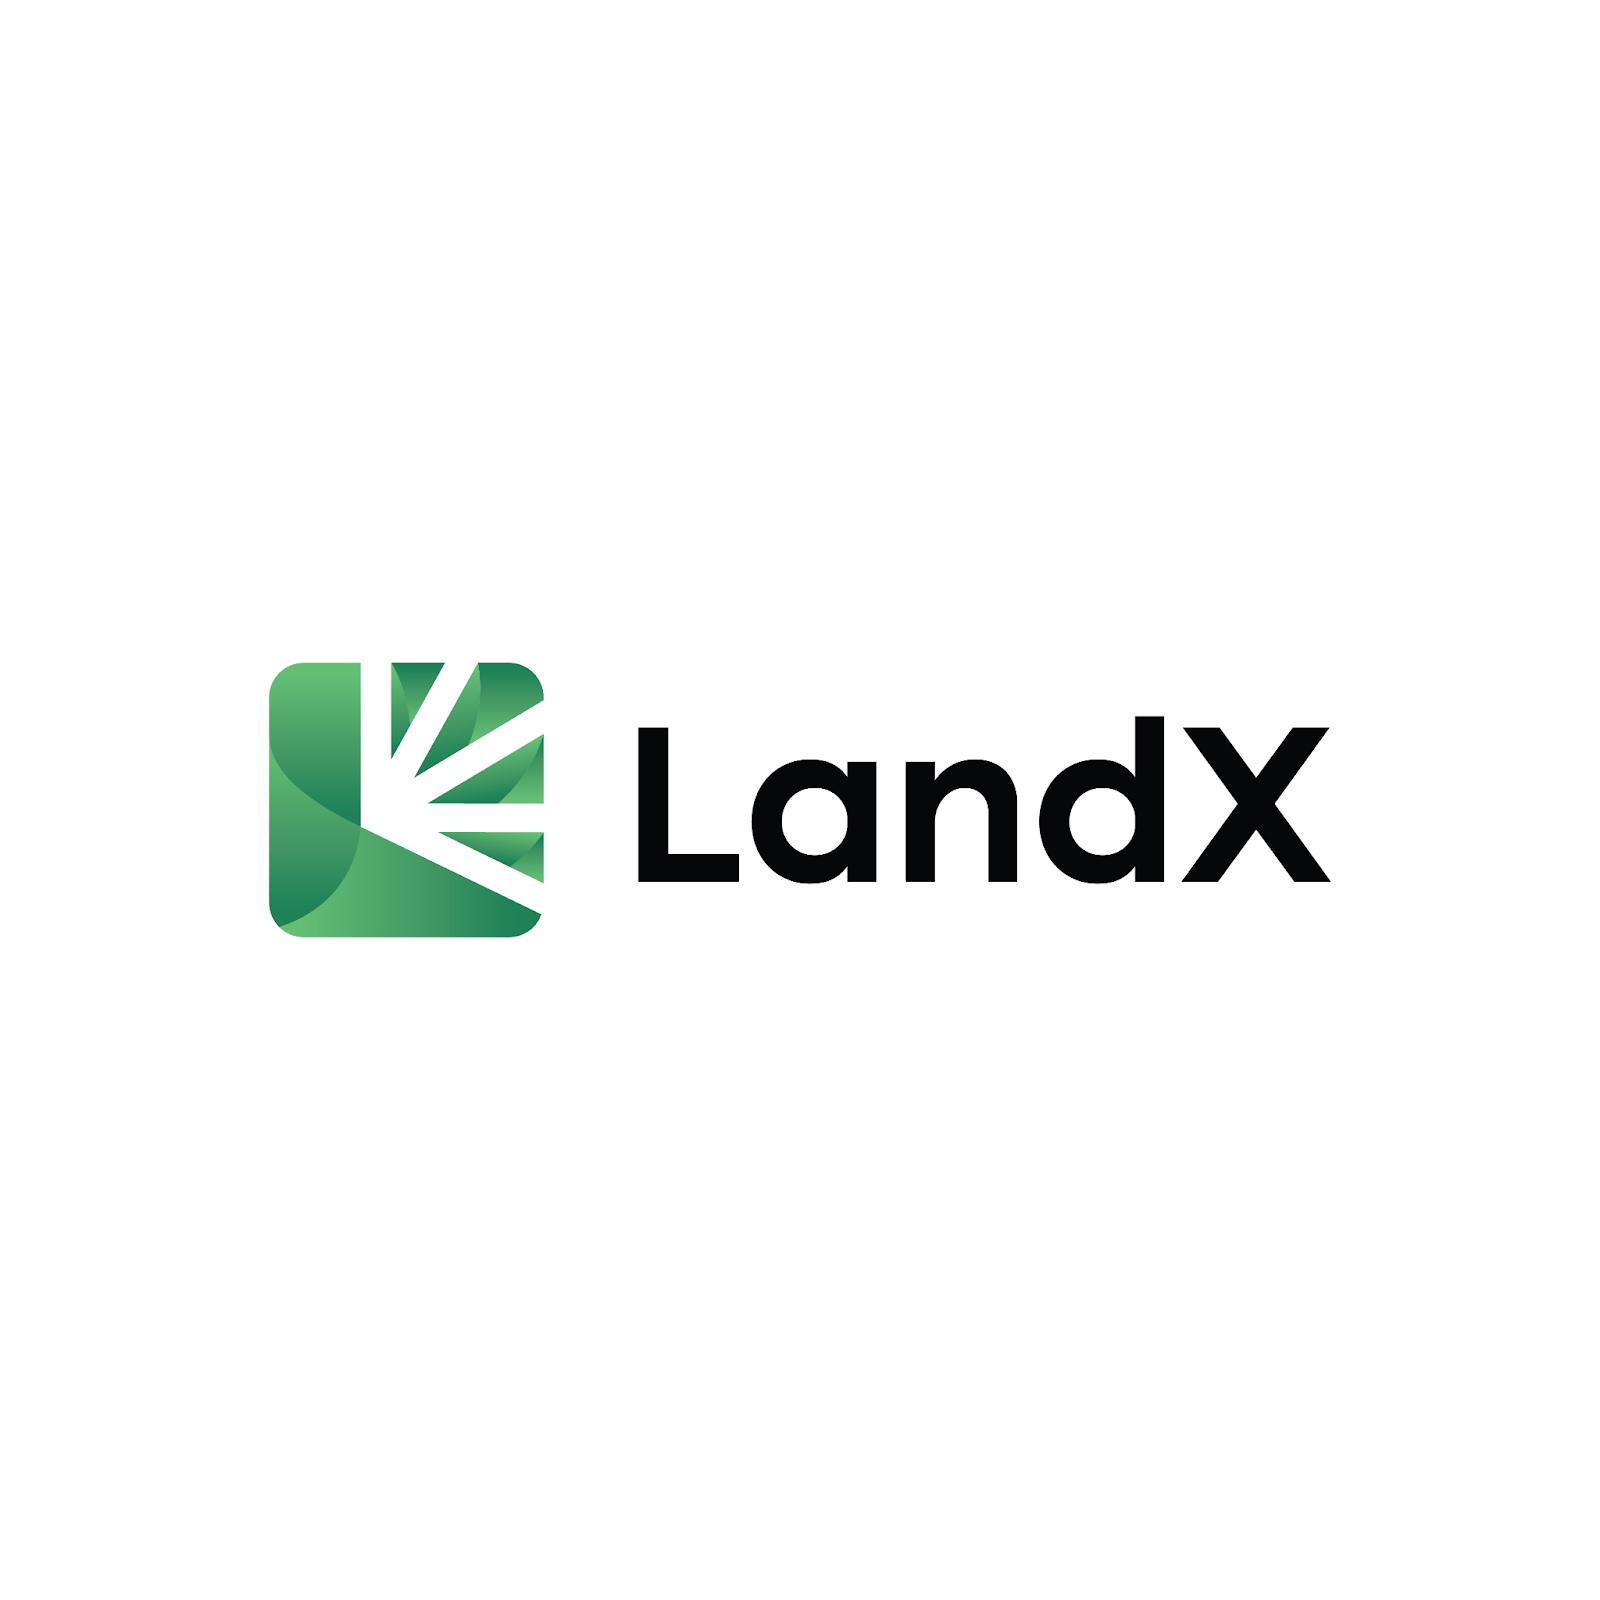 LandX, Tuesday, November 15, 2022, Press release picture